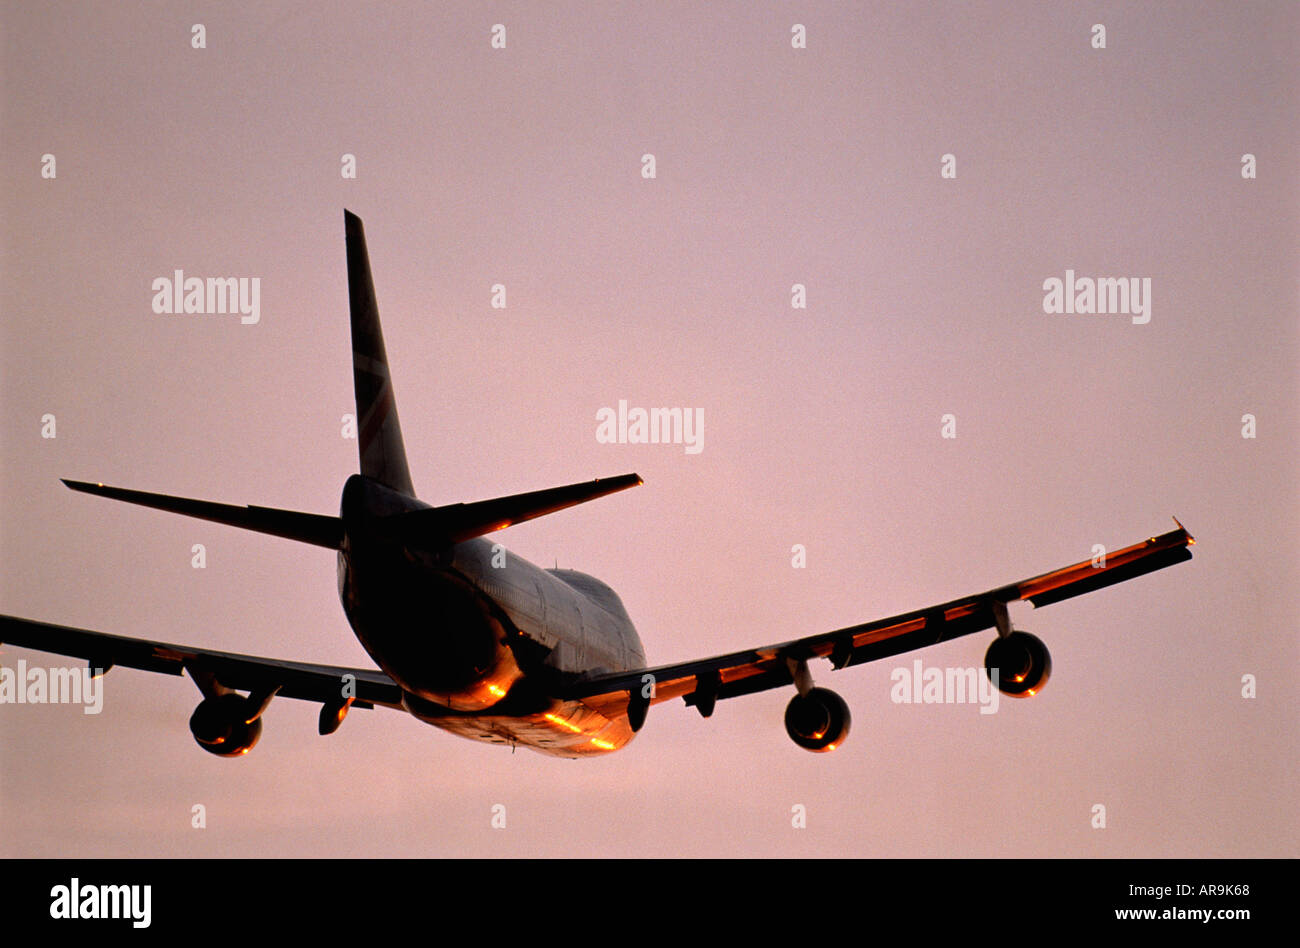 Boeing 747 in the air flying into an pink purple sky at sunset sunrise dusk showing jet thrust exhaust pollution wing Stock Photo